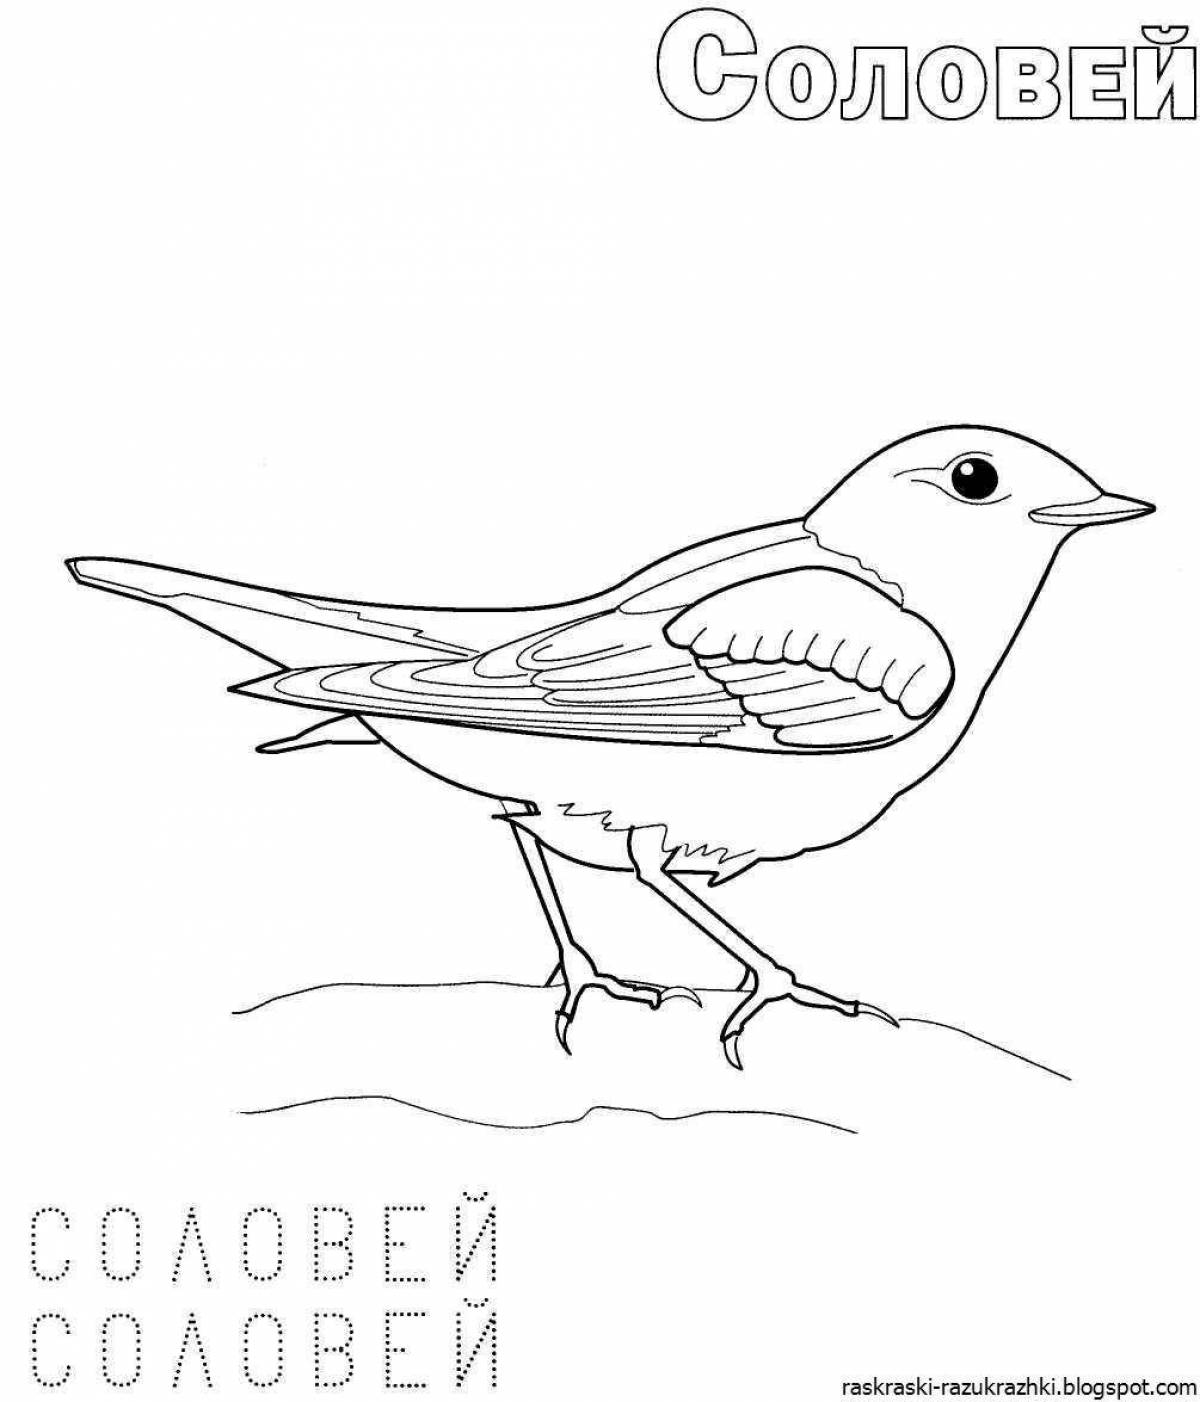 Animated bird coloring book for children 6-7 years old